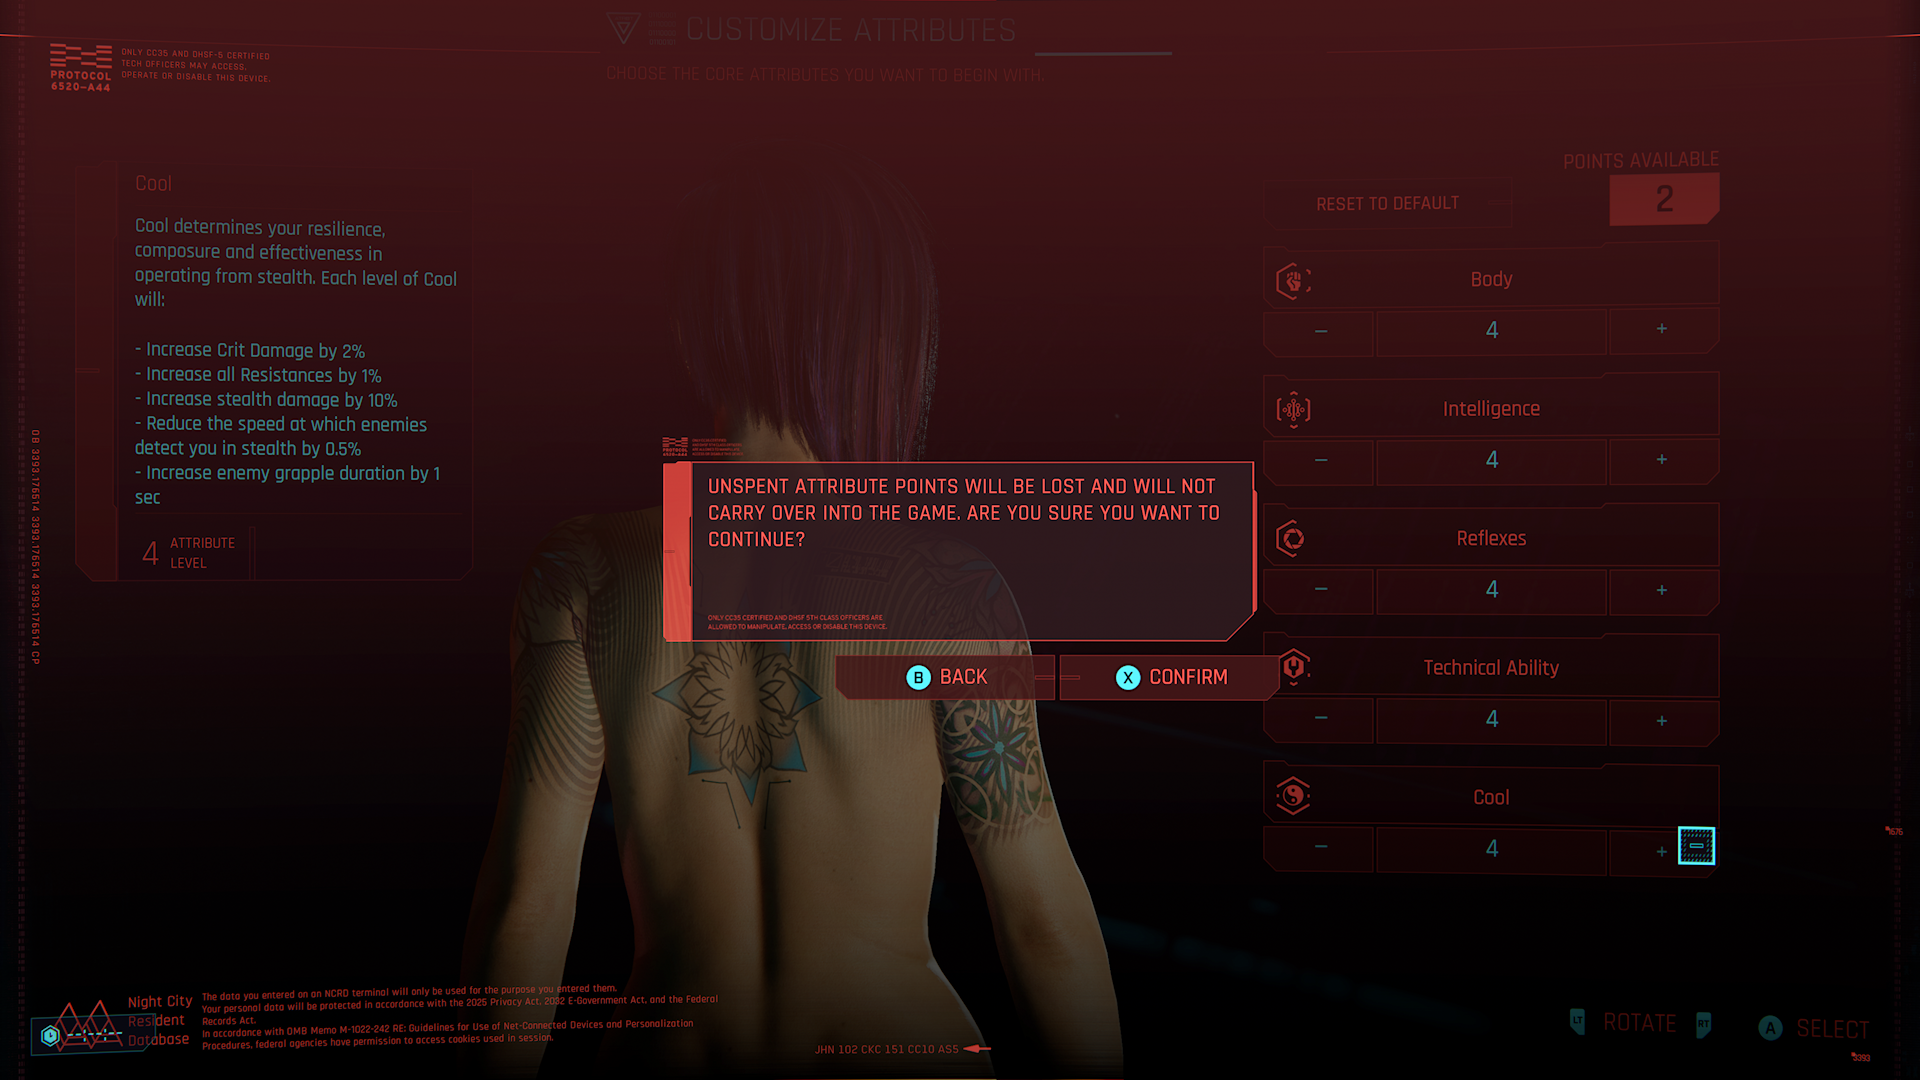 Cyberpunk 2077 screenshot of character creation process's spending attribute points screen. Body, intelligence, reflexes, technical ability, and cool are all set to 4. A warning prompt is in the middle of the screen in all caps and reads, "Unspent attribute points will be lost and will not carry over into the game. Are you sure you want to continue?"